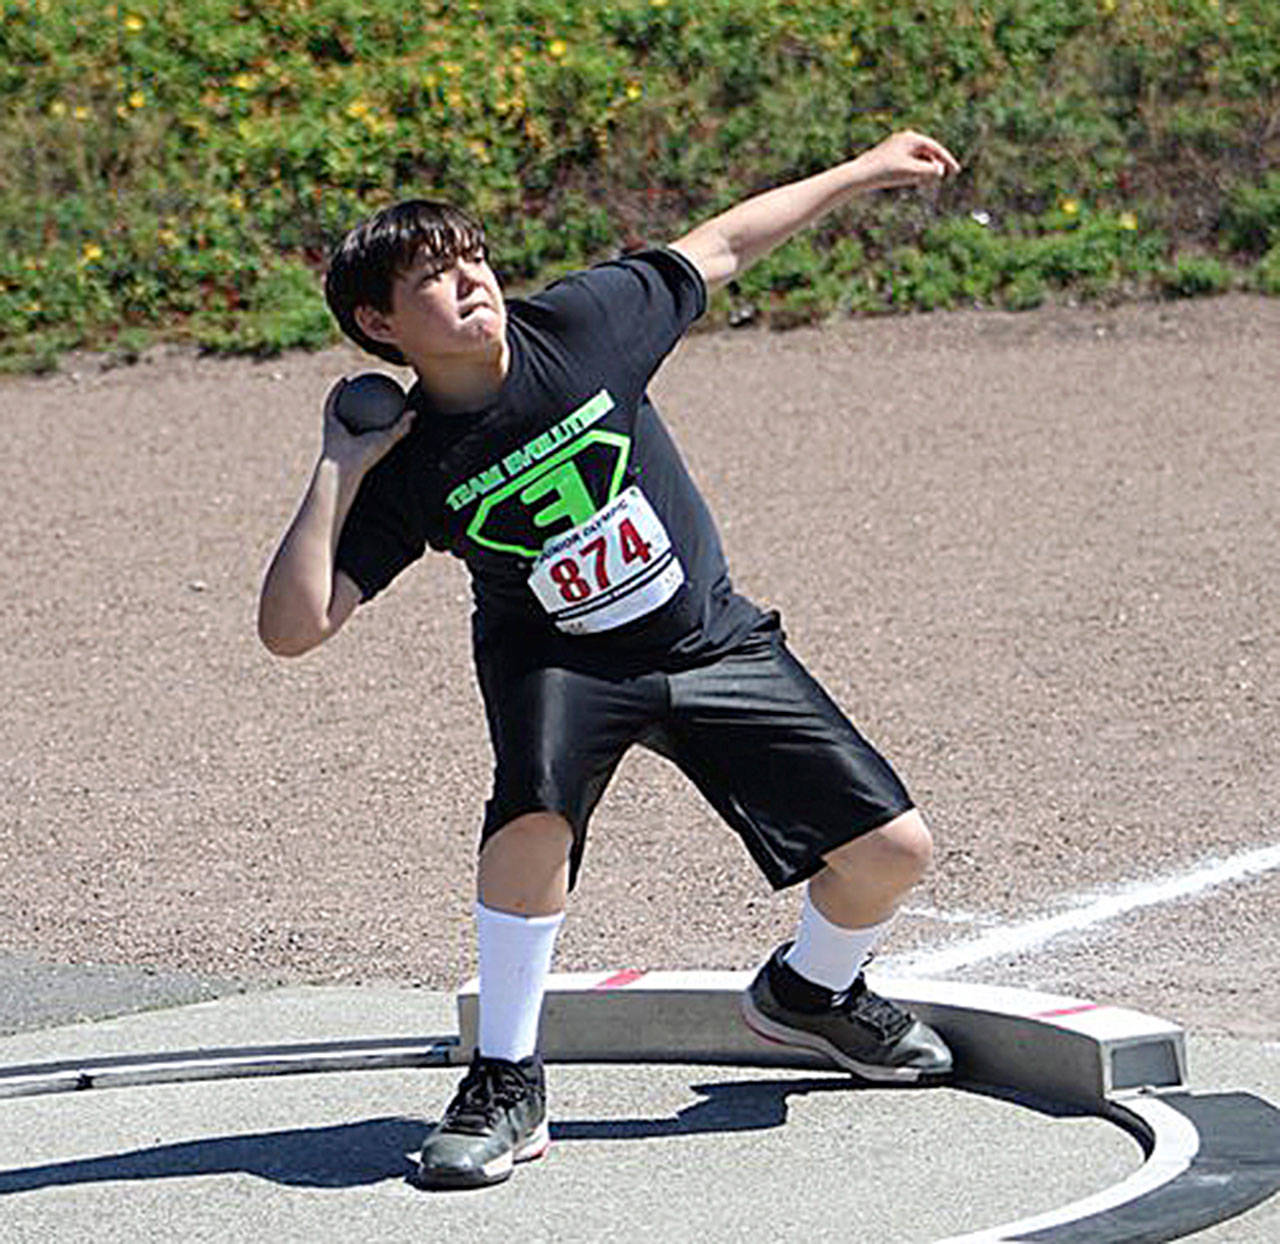 Shaun Straka Jr. heaves a shot put during the USATF Pacific Northwest Association Junior Olympic Championships in Tacoma last weekend. (Photo courtesy of Team Evolution Athletics)